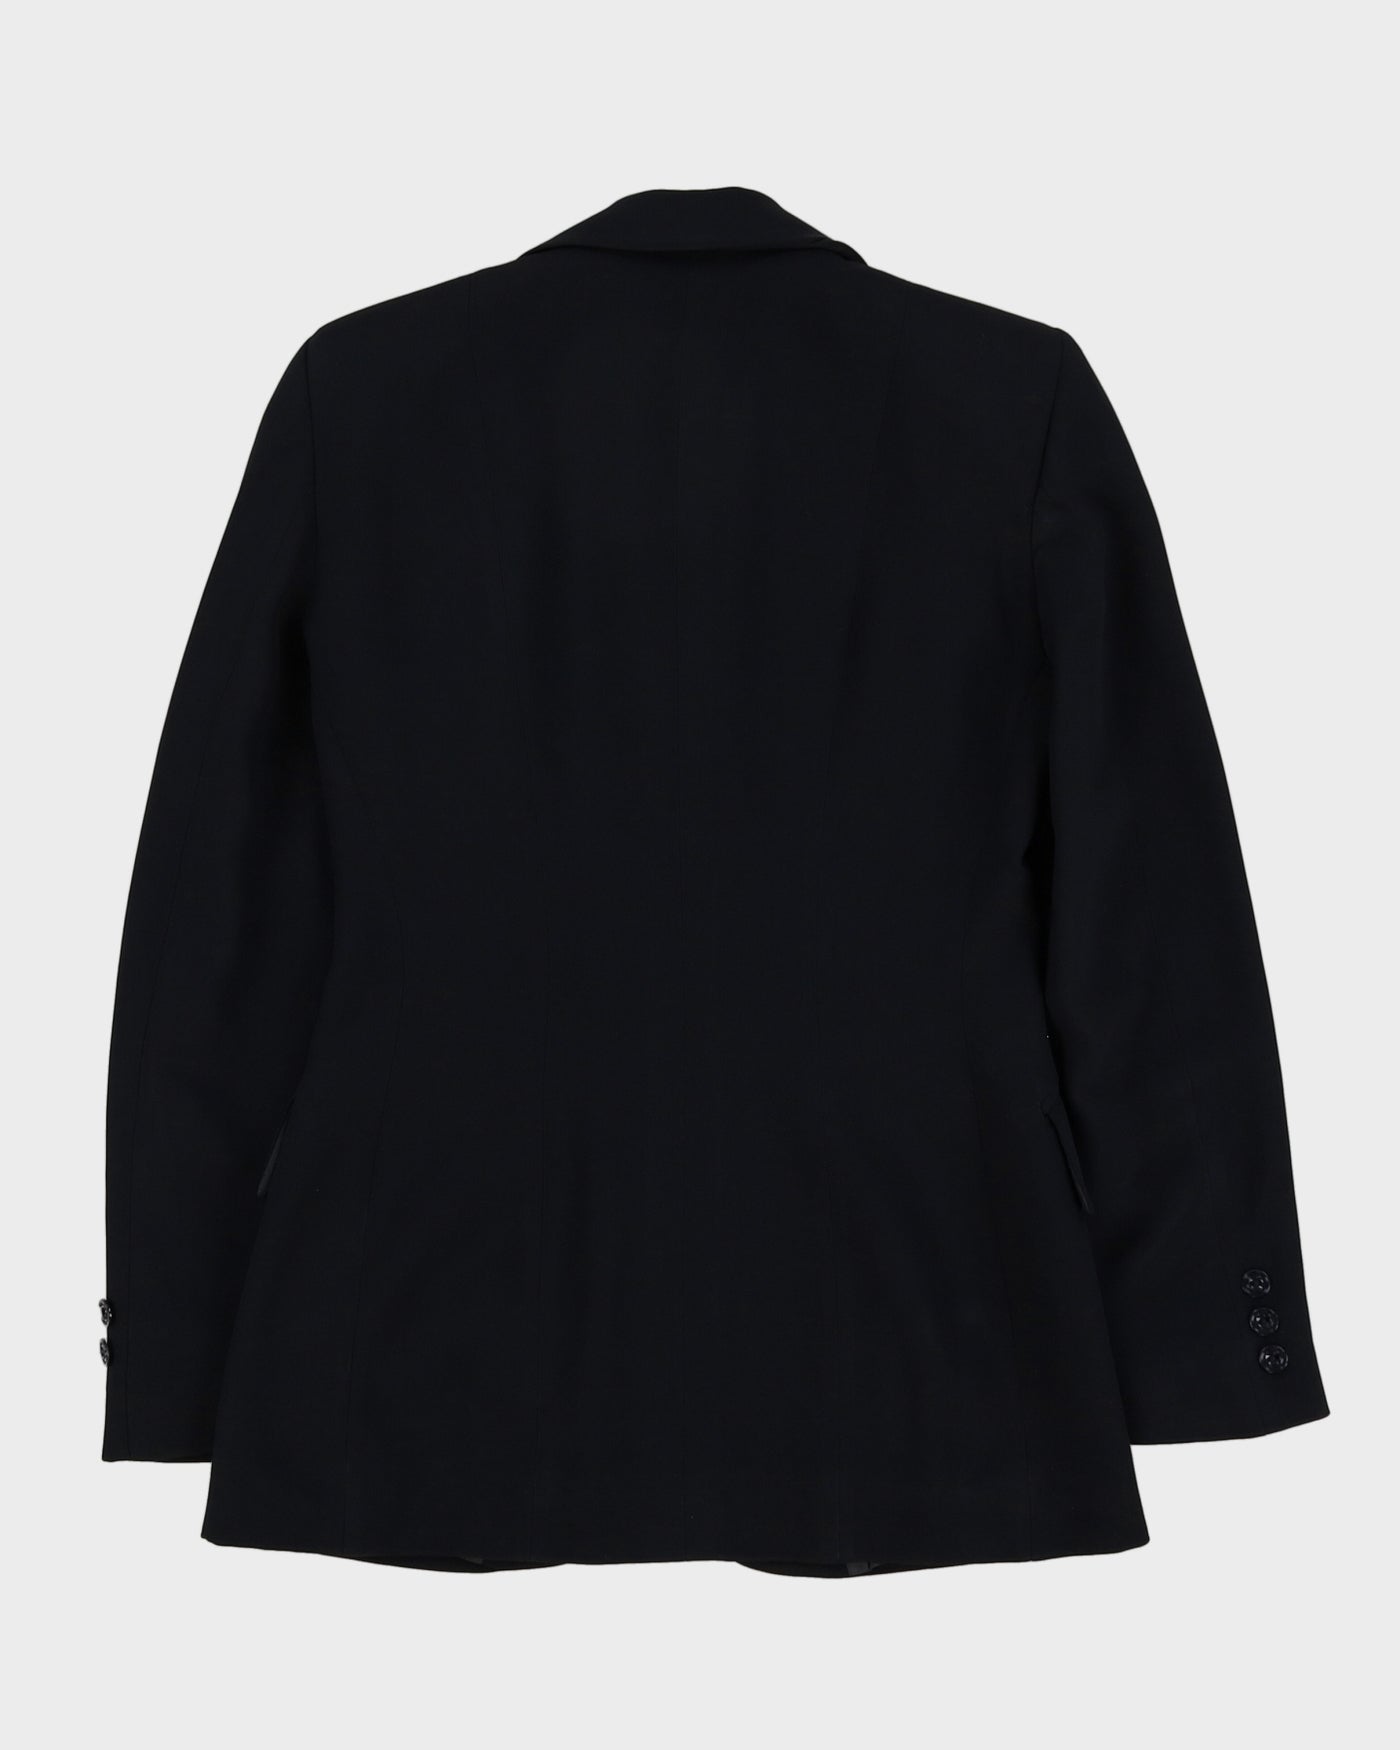 Cheap And Chic By Moschino Navy Blazer - S